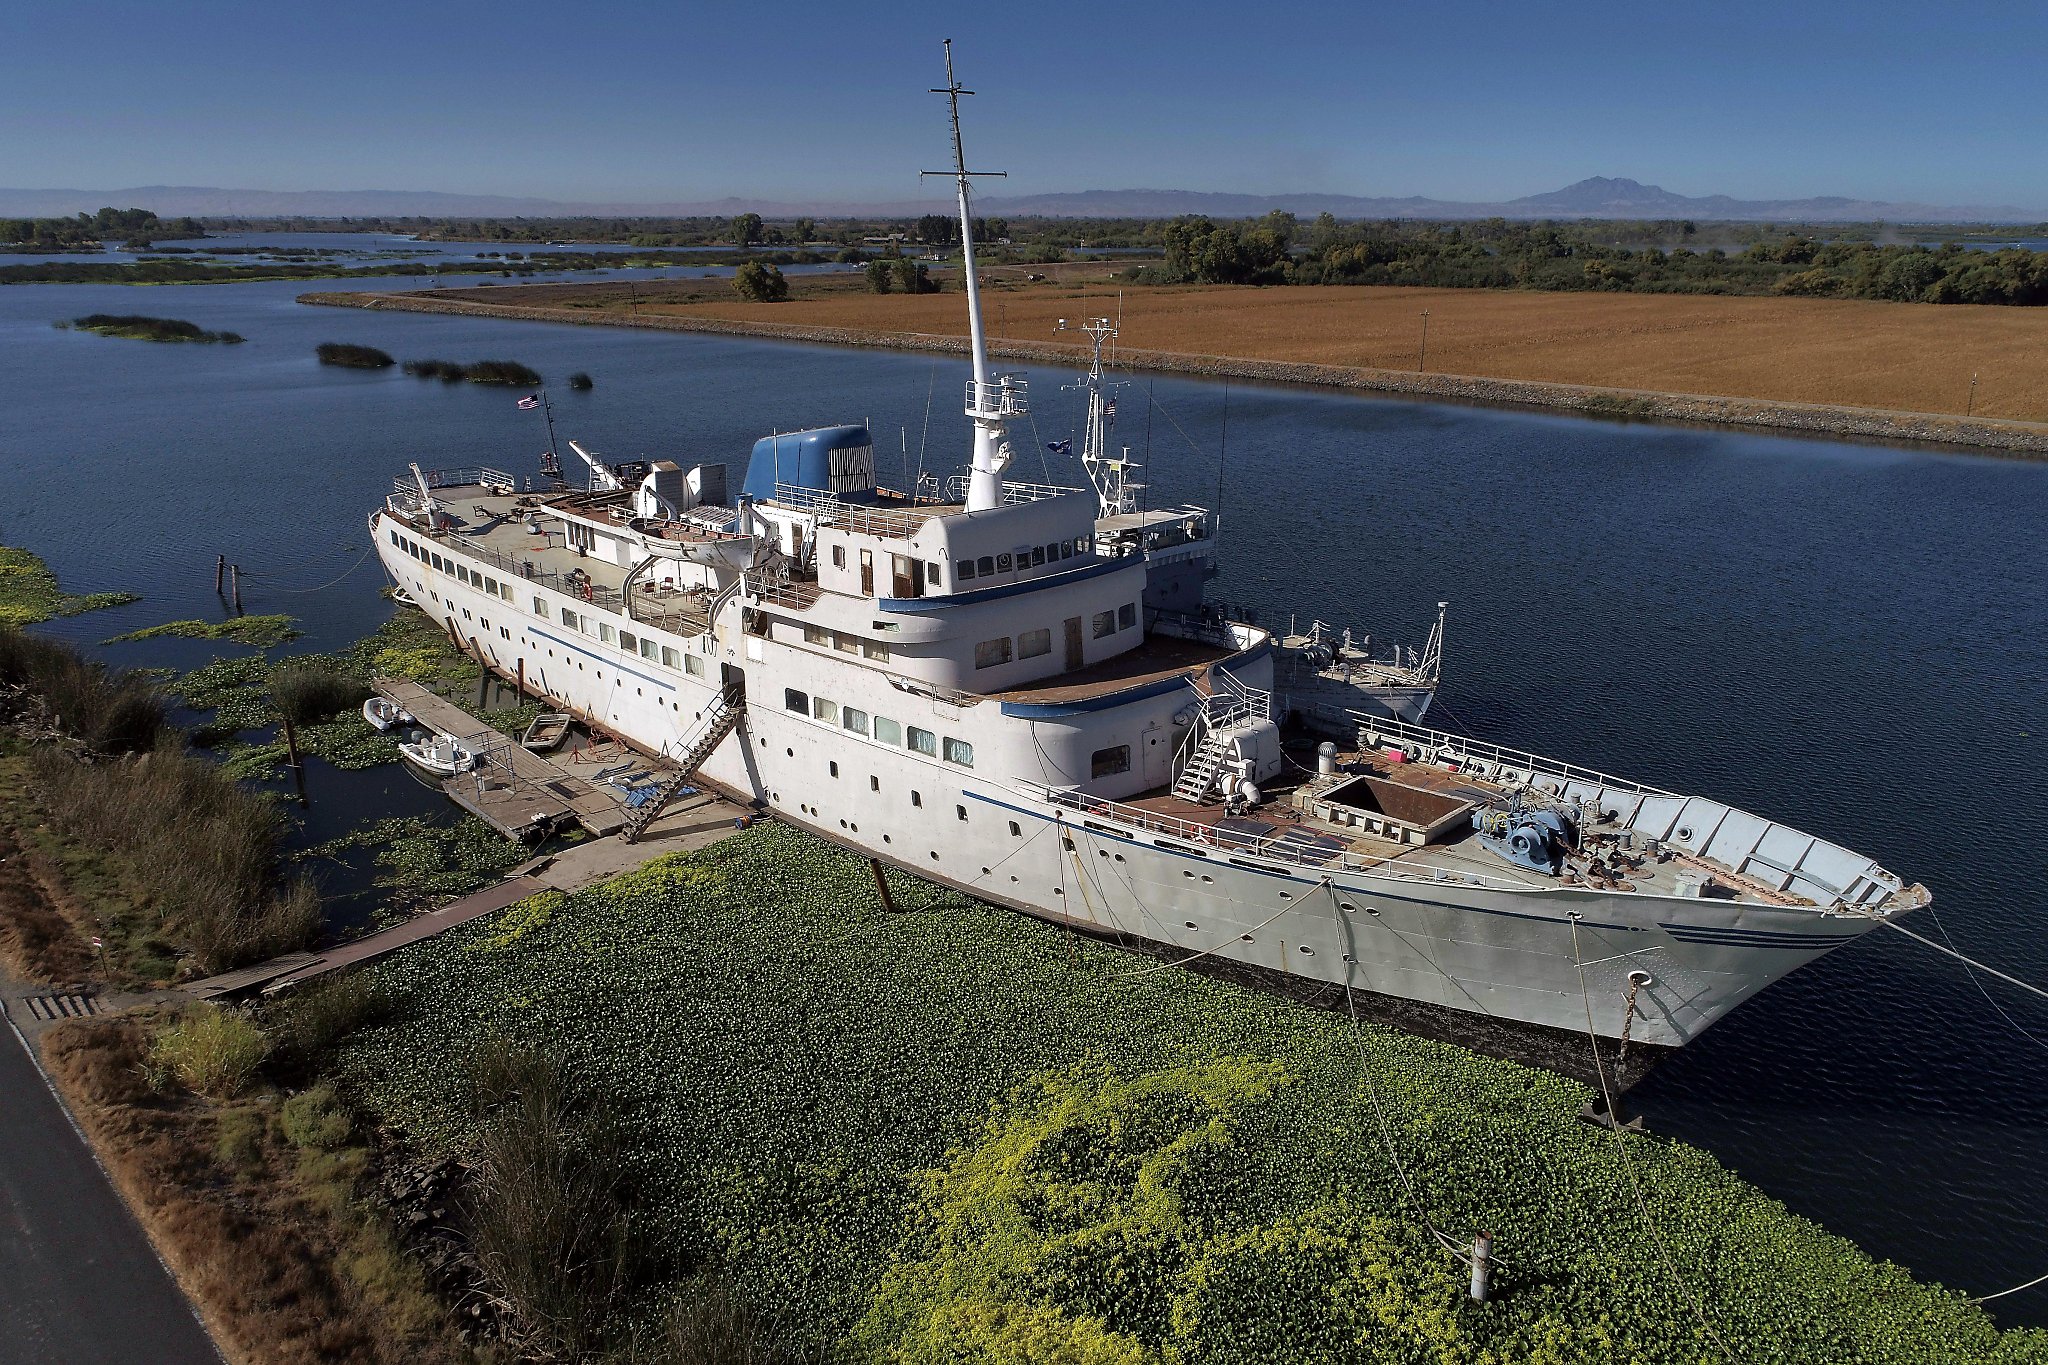 He lives in a 65-year-old cruise ship idling in the California Delta image